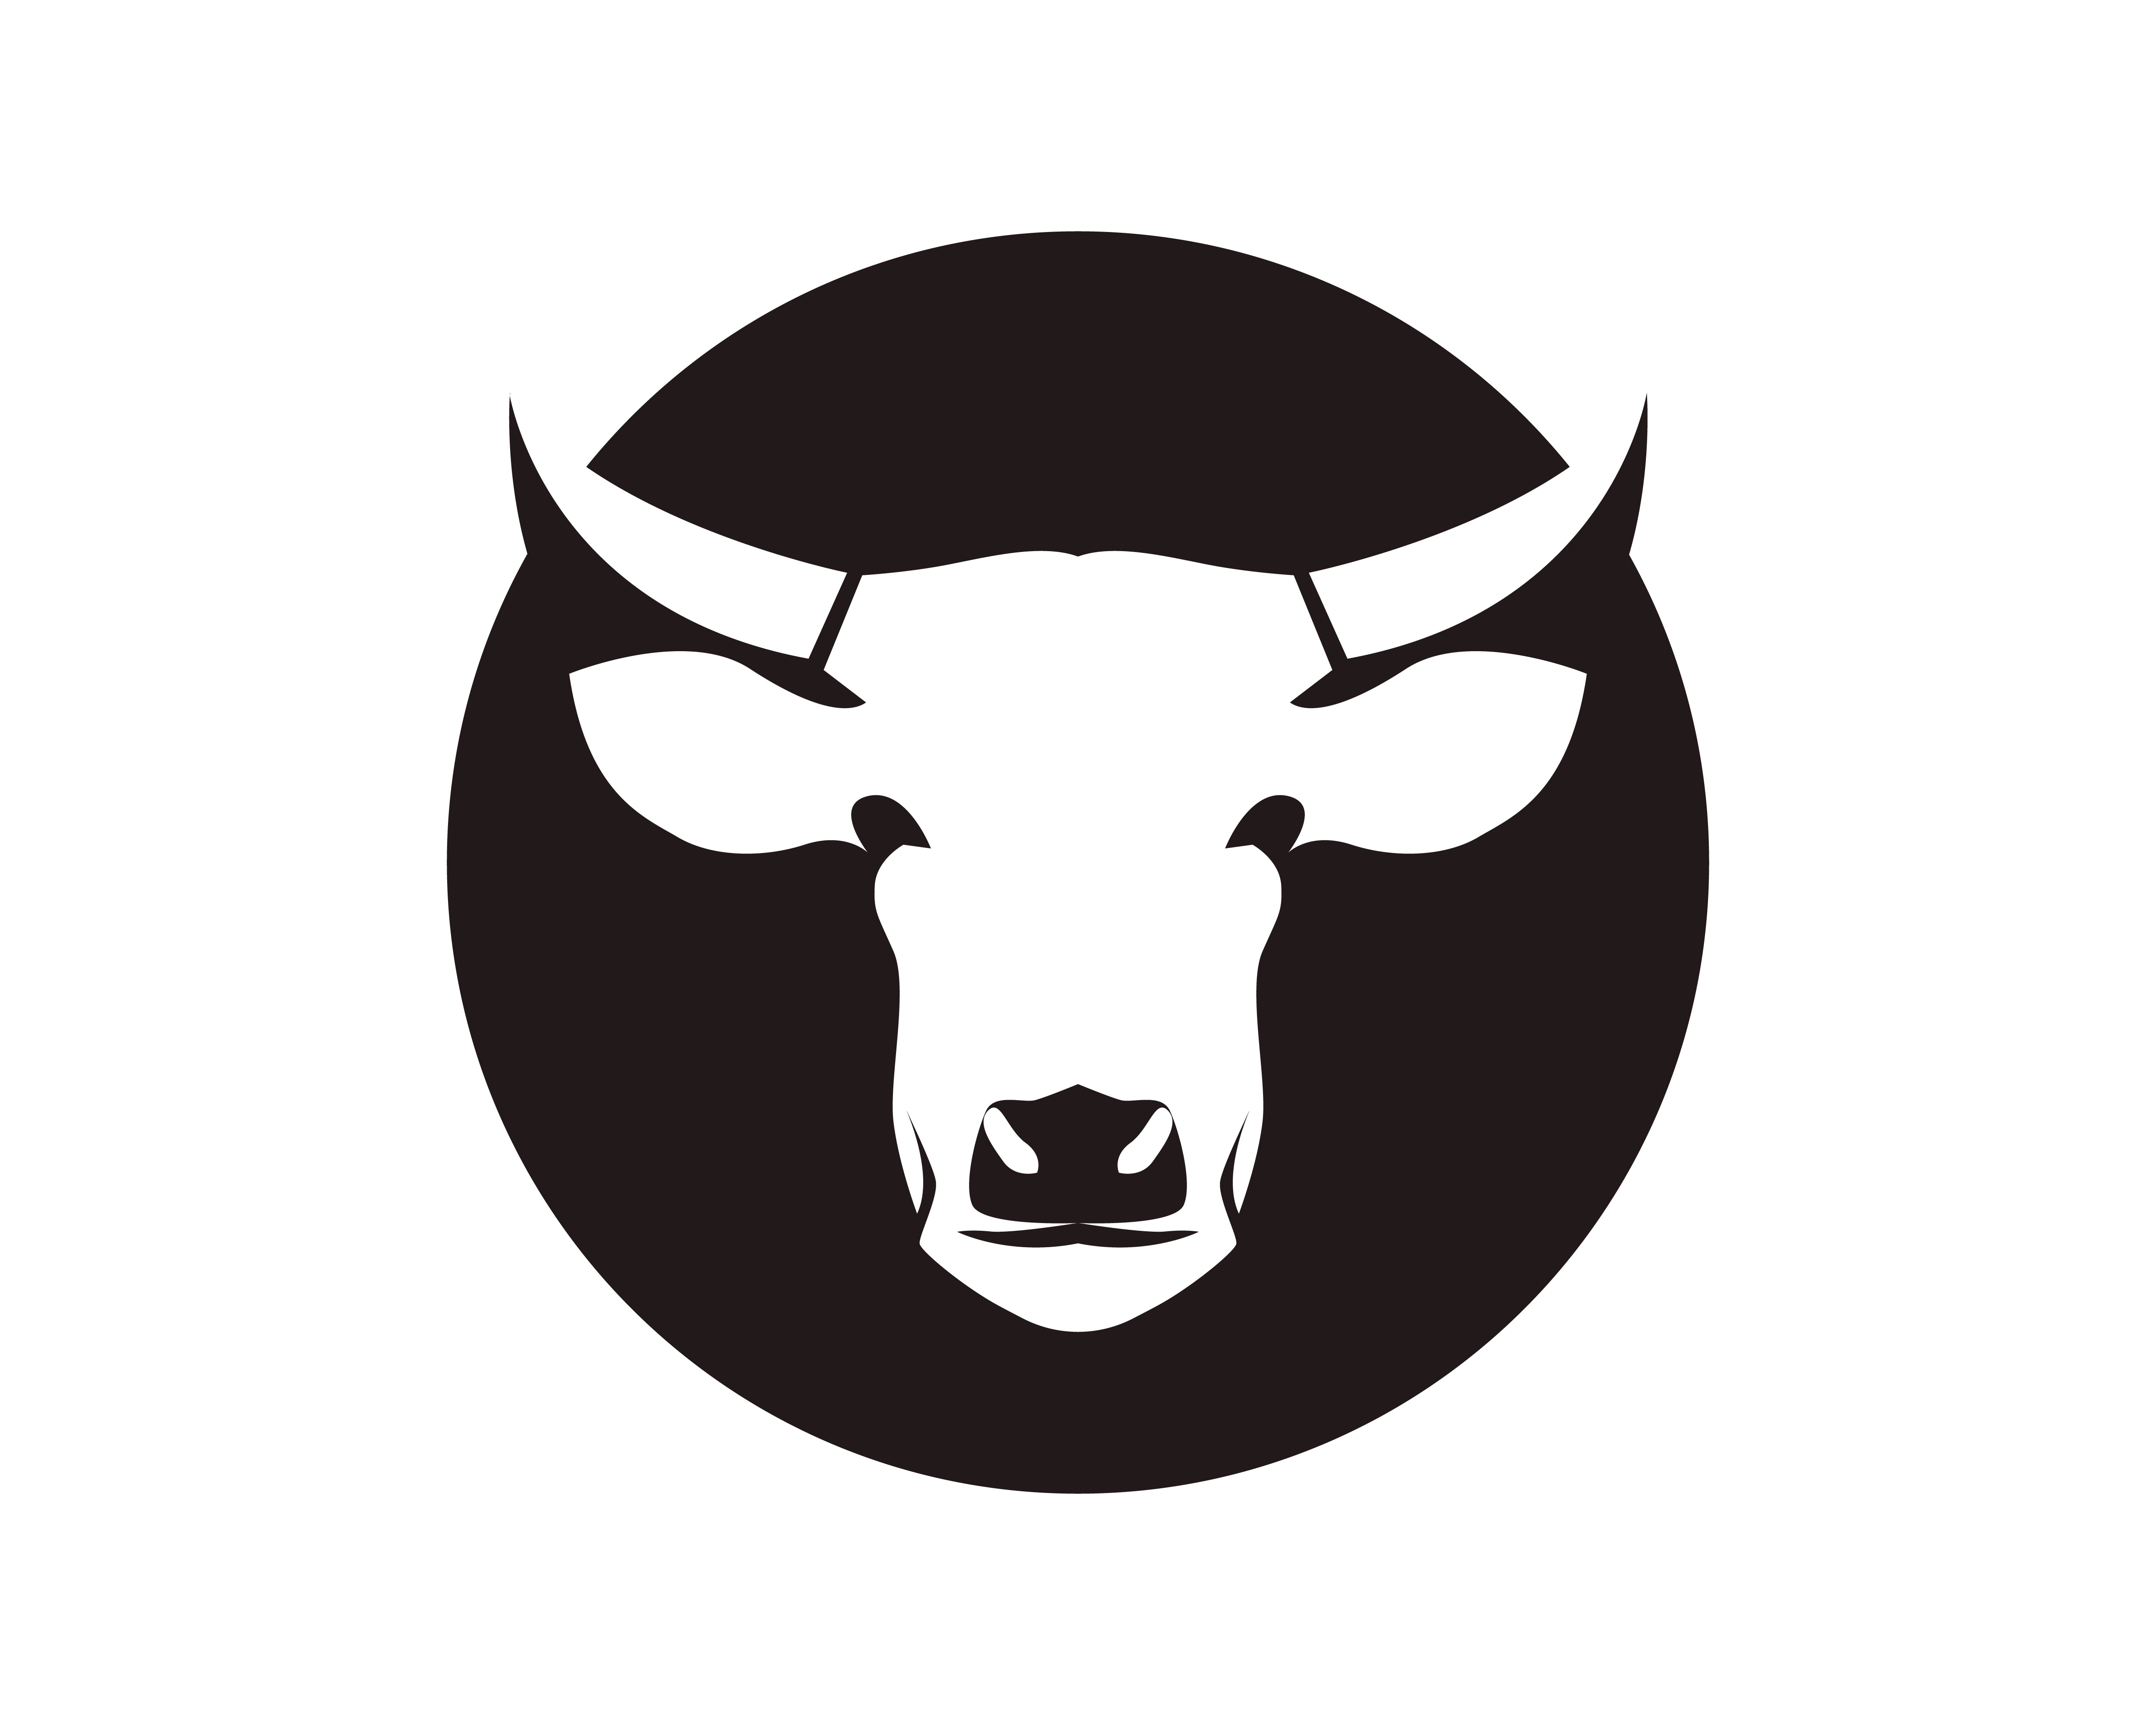 Download the Cow head symbols and logo vector template 620040 royalty-free Vect...